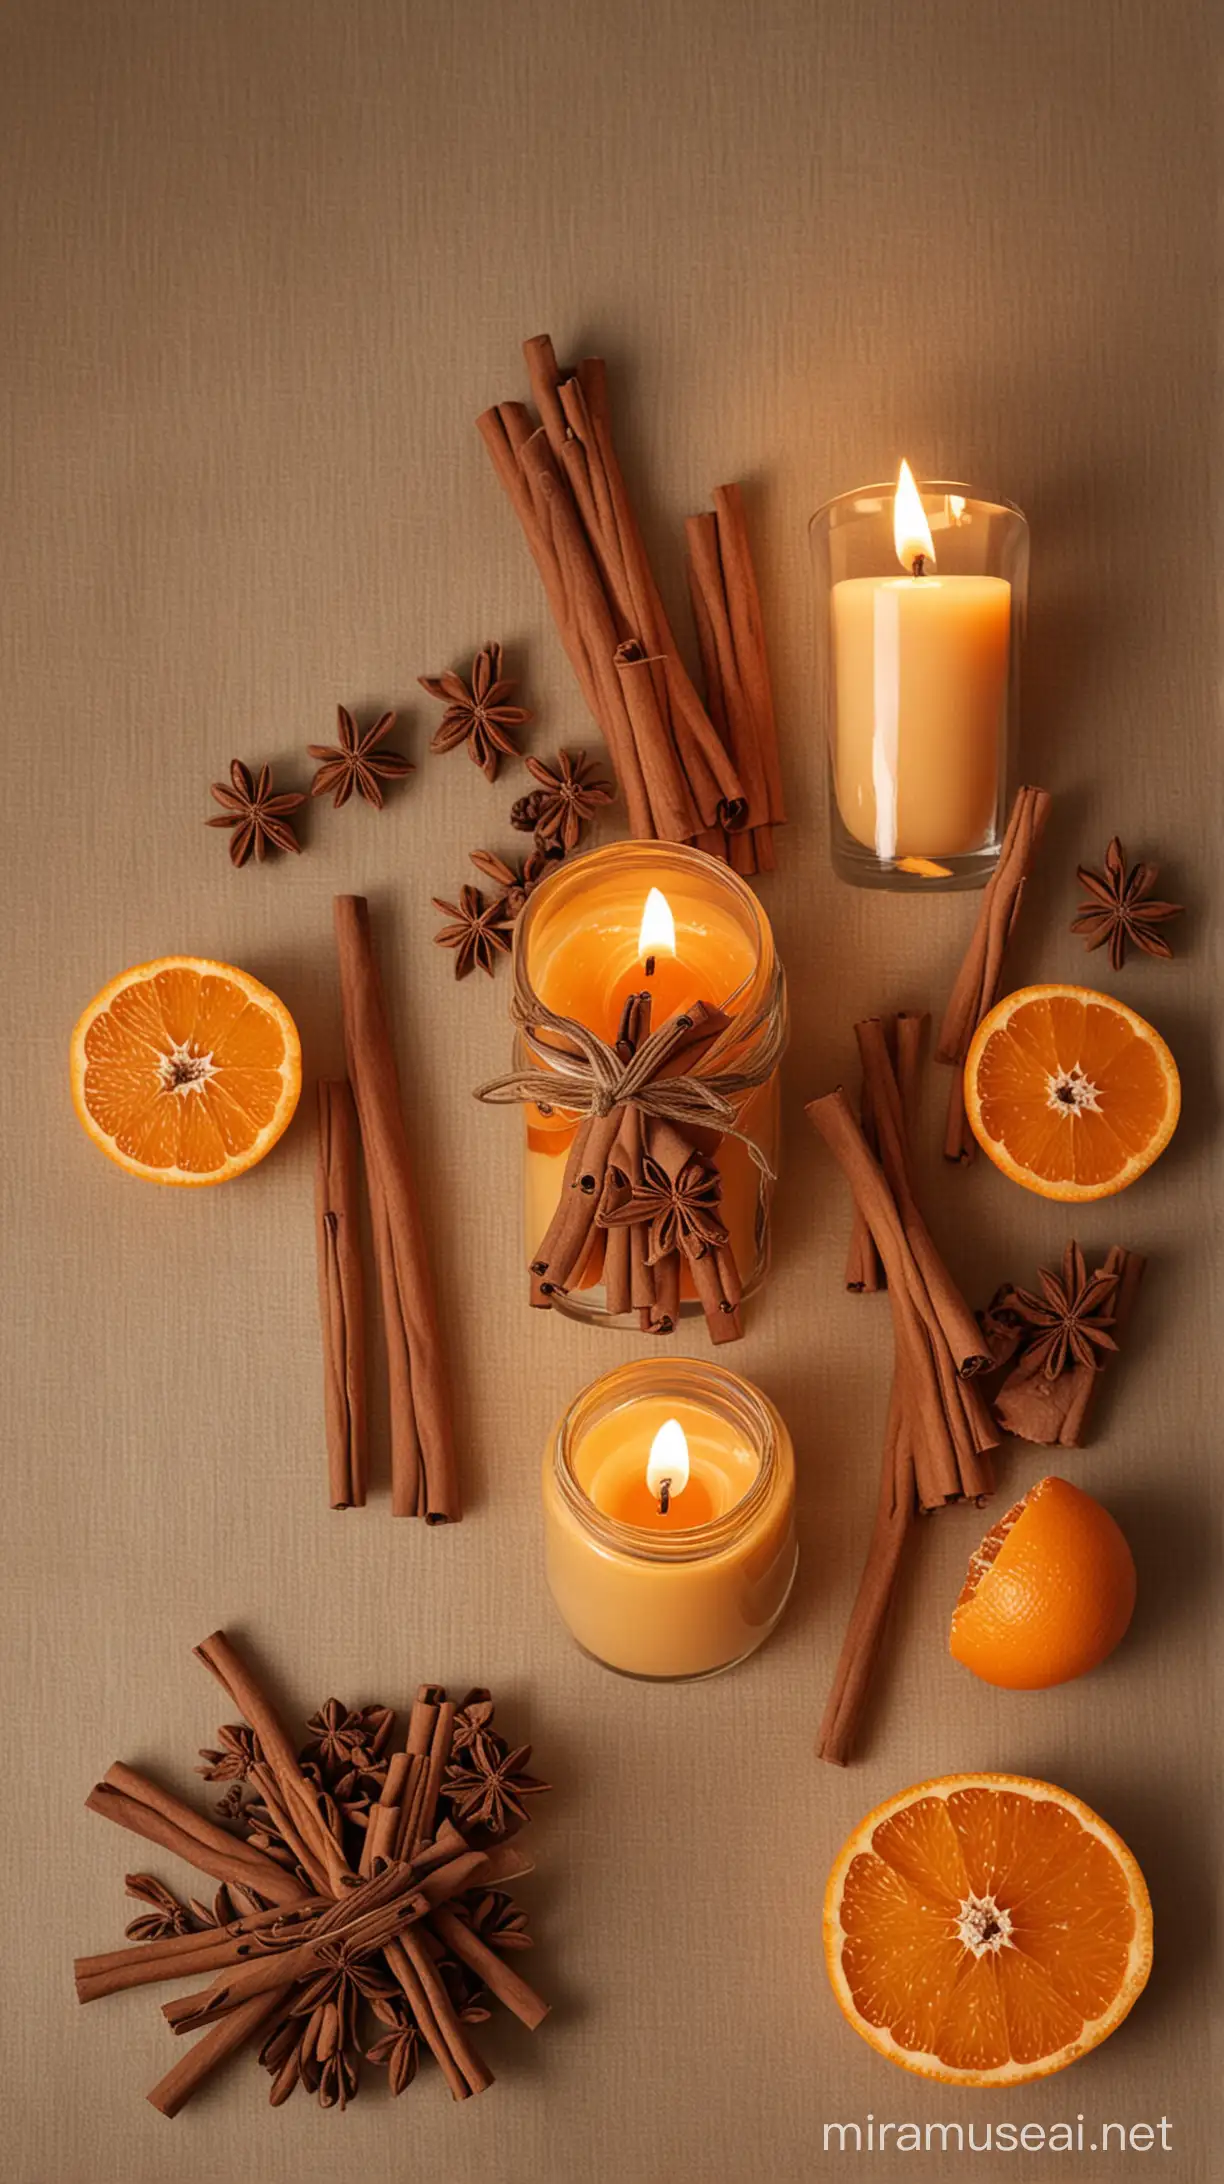 Tranquil Candlelit Room with Dried Oranges and Cinnamon Sticks